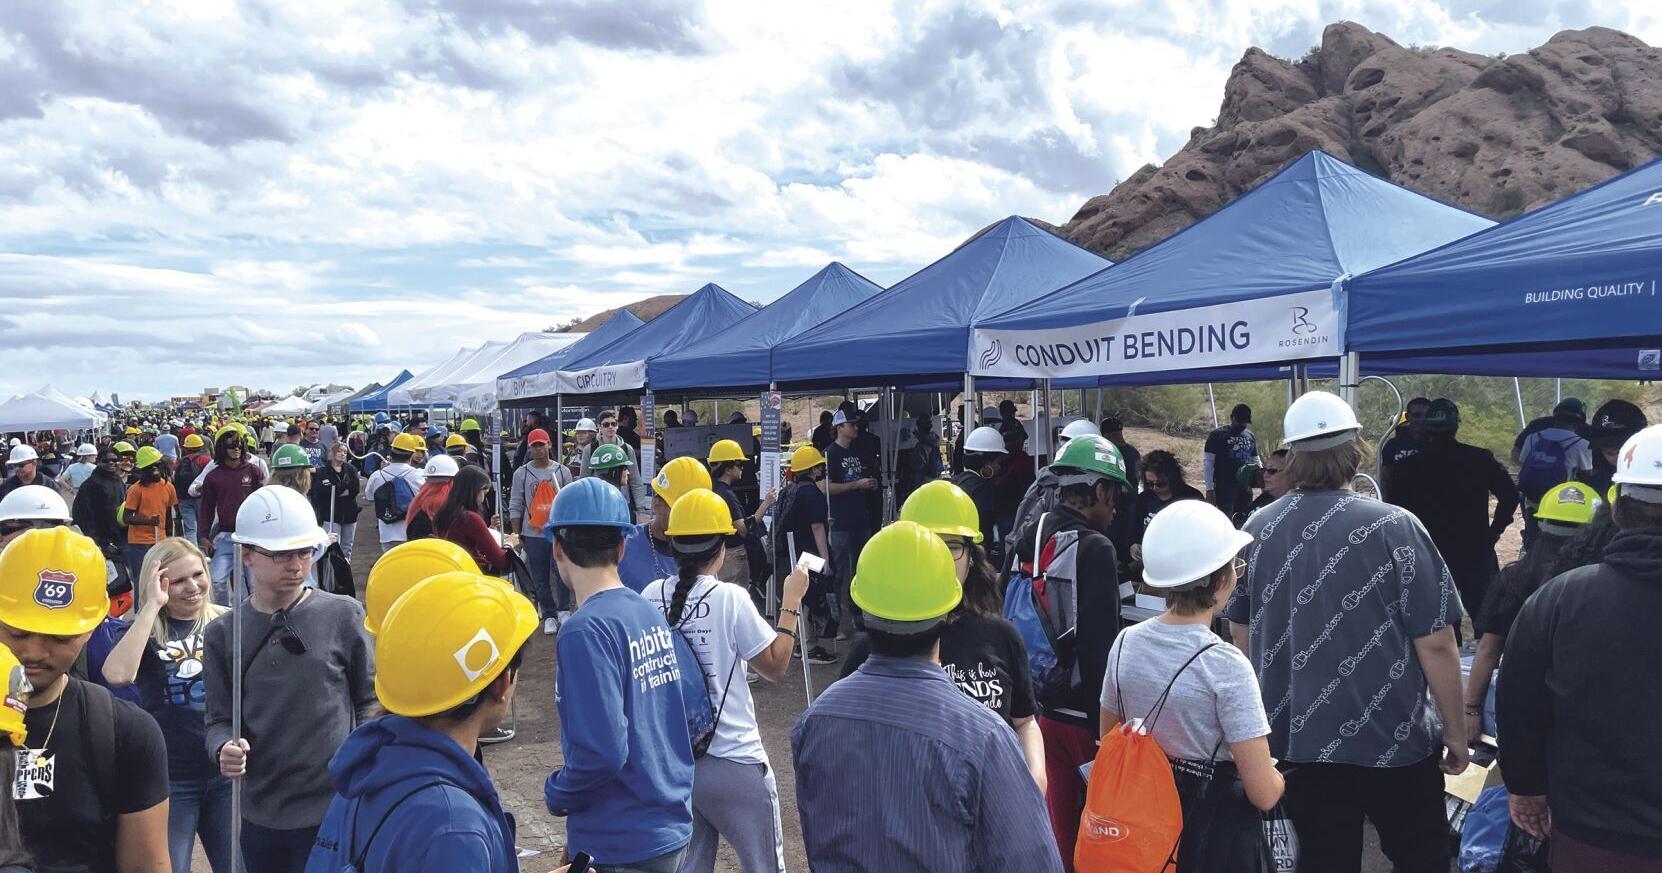 Labor-starved building industry seeks young people to fill jobs